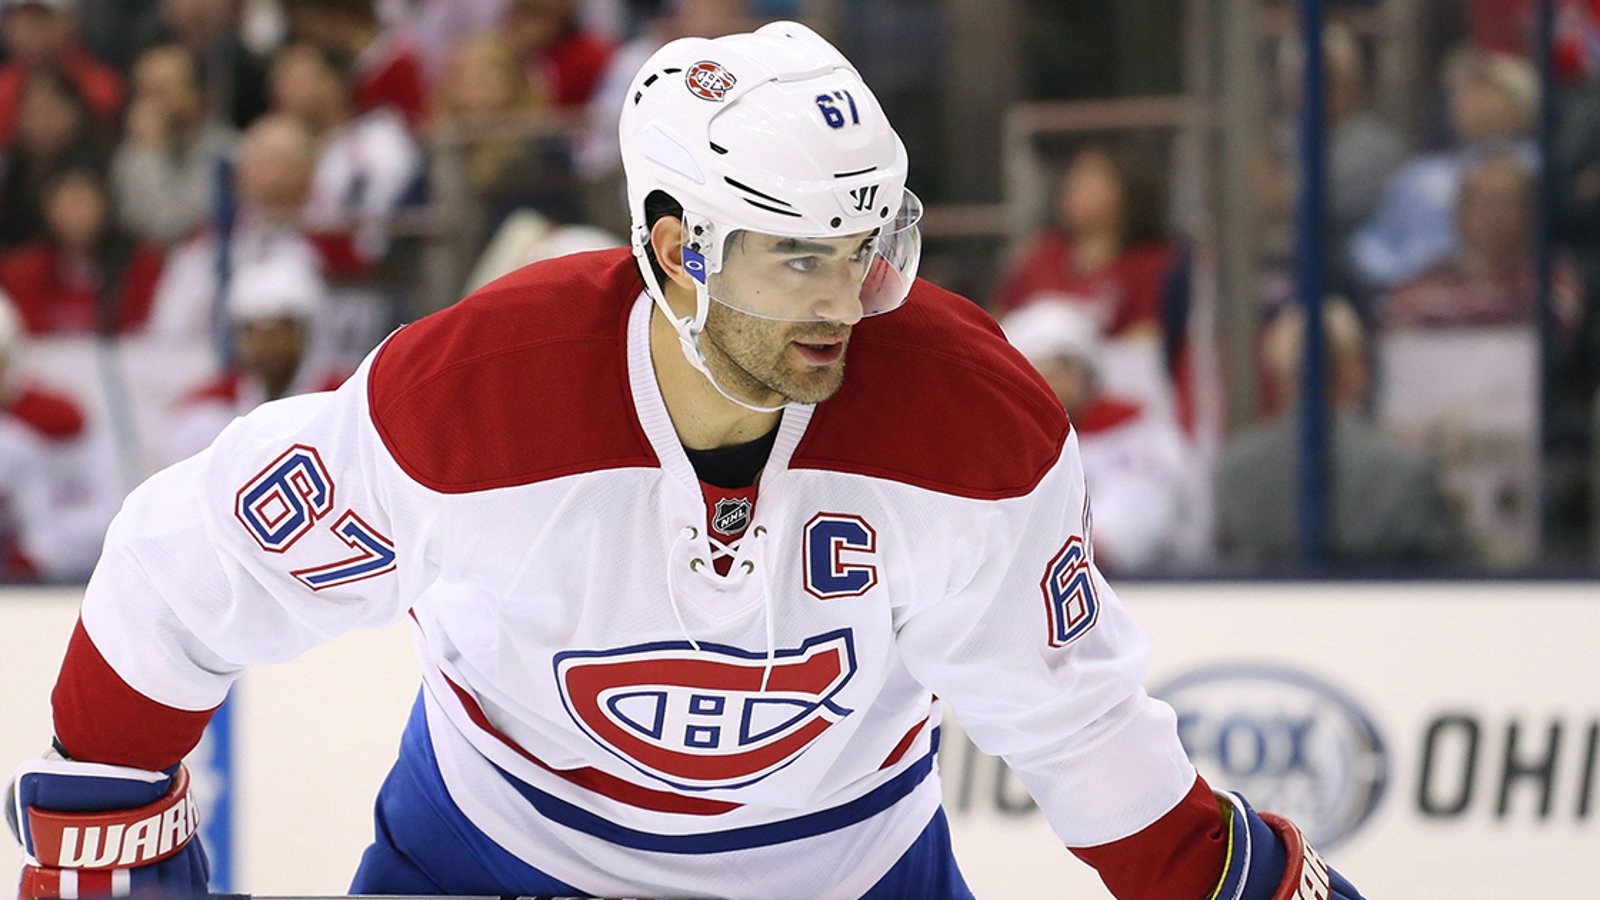 Report: Pacioretty “drowning” in Montreal